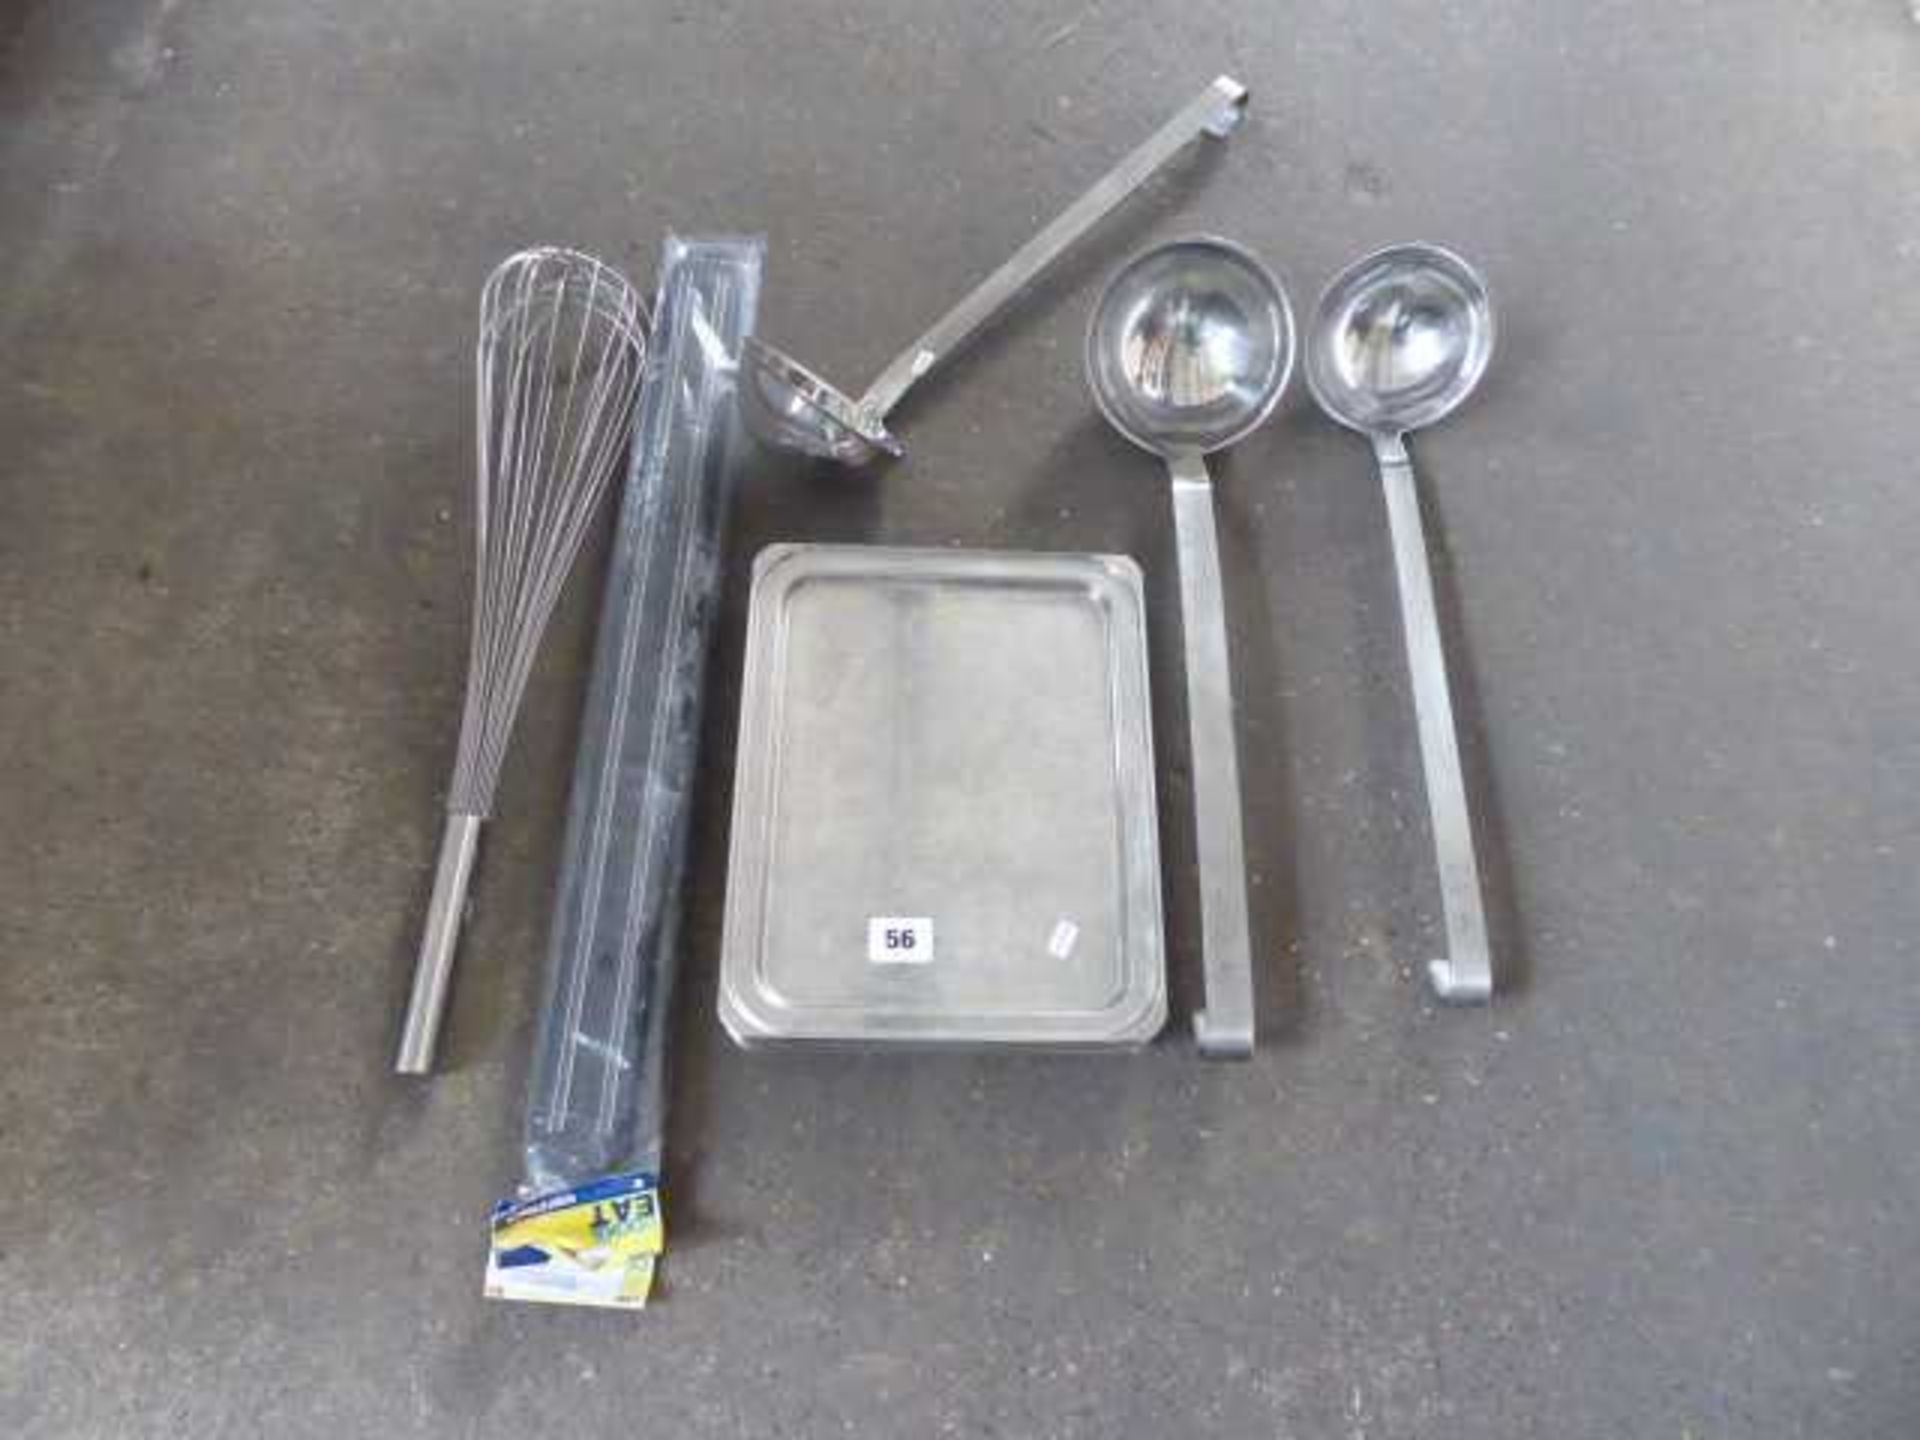 Small stack of trays, large whisk, 3 ladles and 2 magnetic knife racks